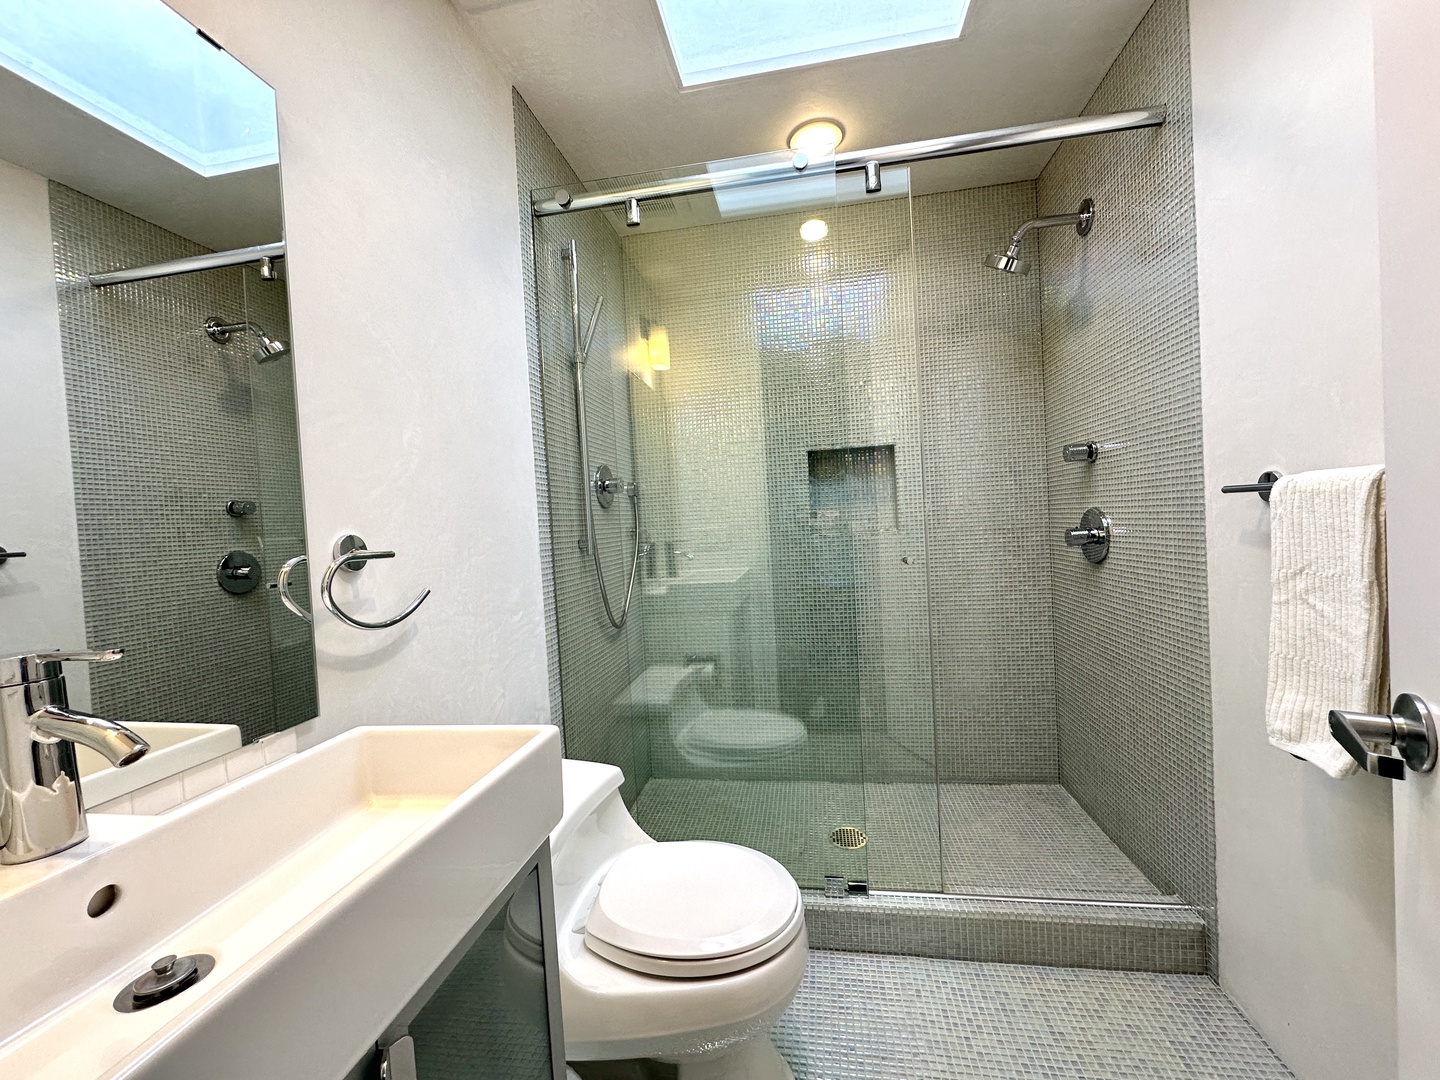 This 2nd-level ensuite offers a single vanity & spa-like glass shower